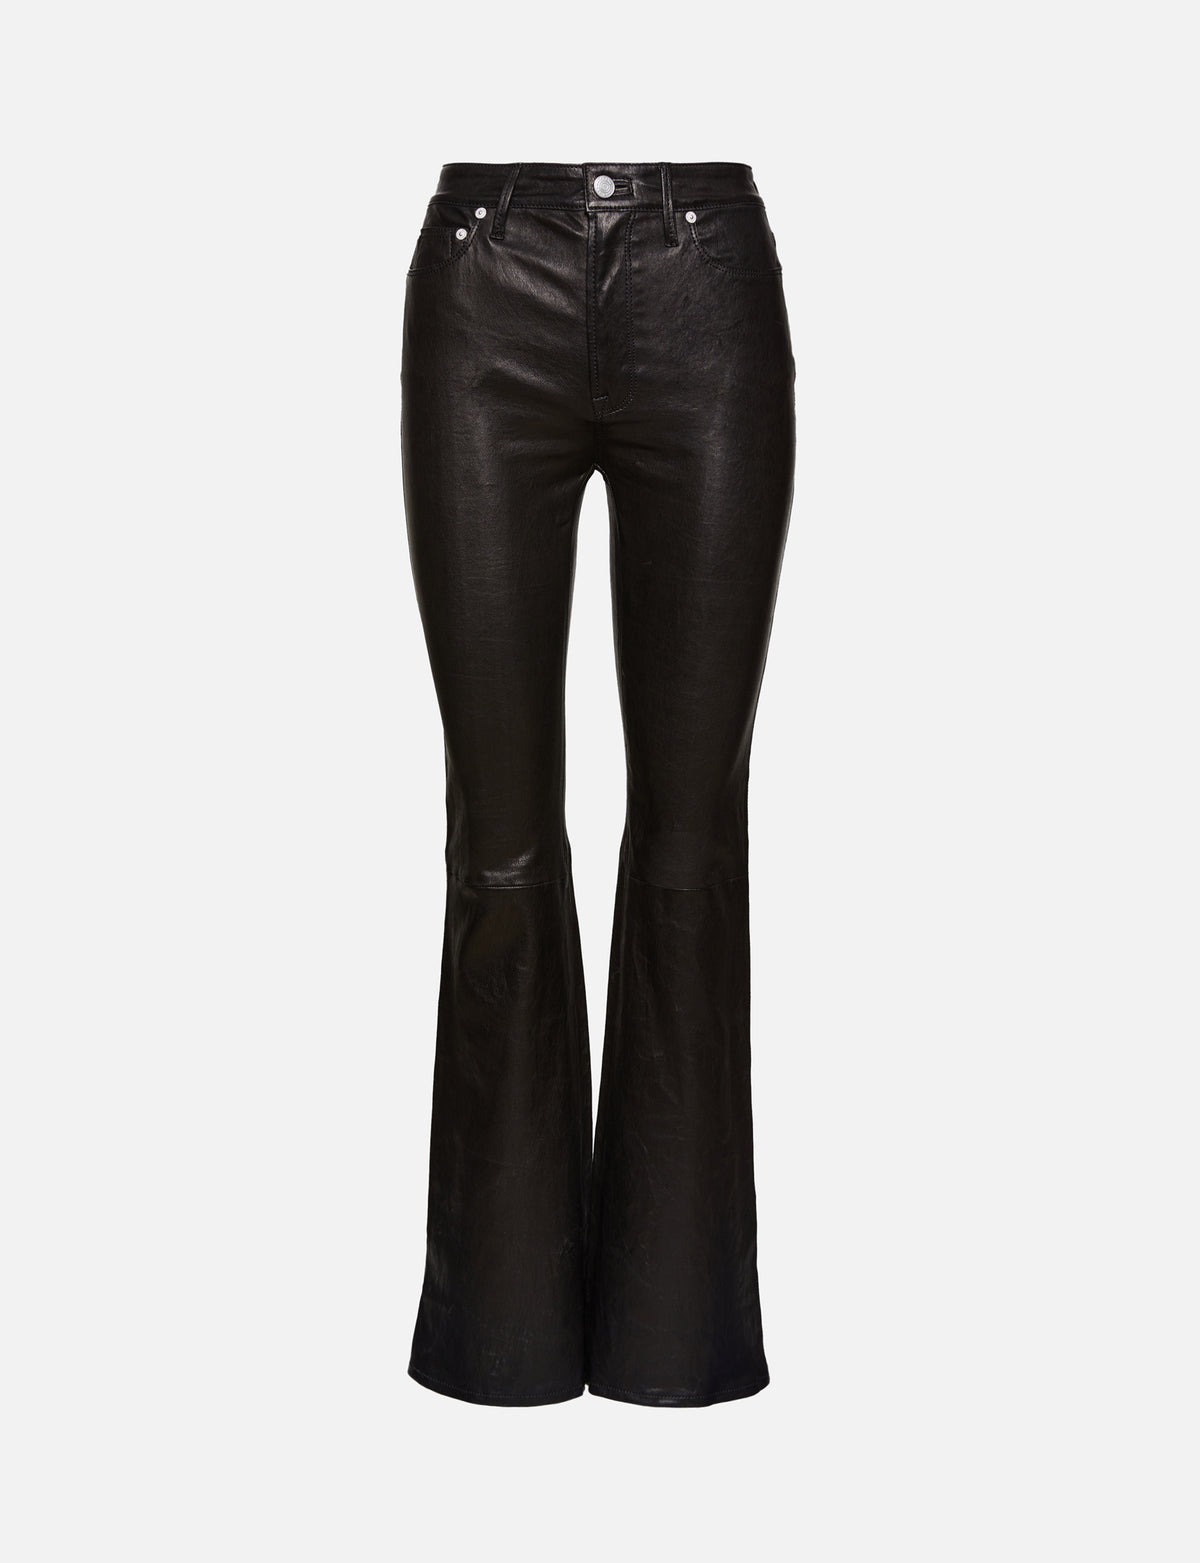 view 1 - Slim Stacked Leather Pant